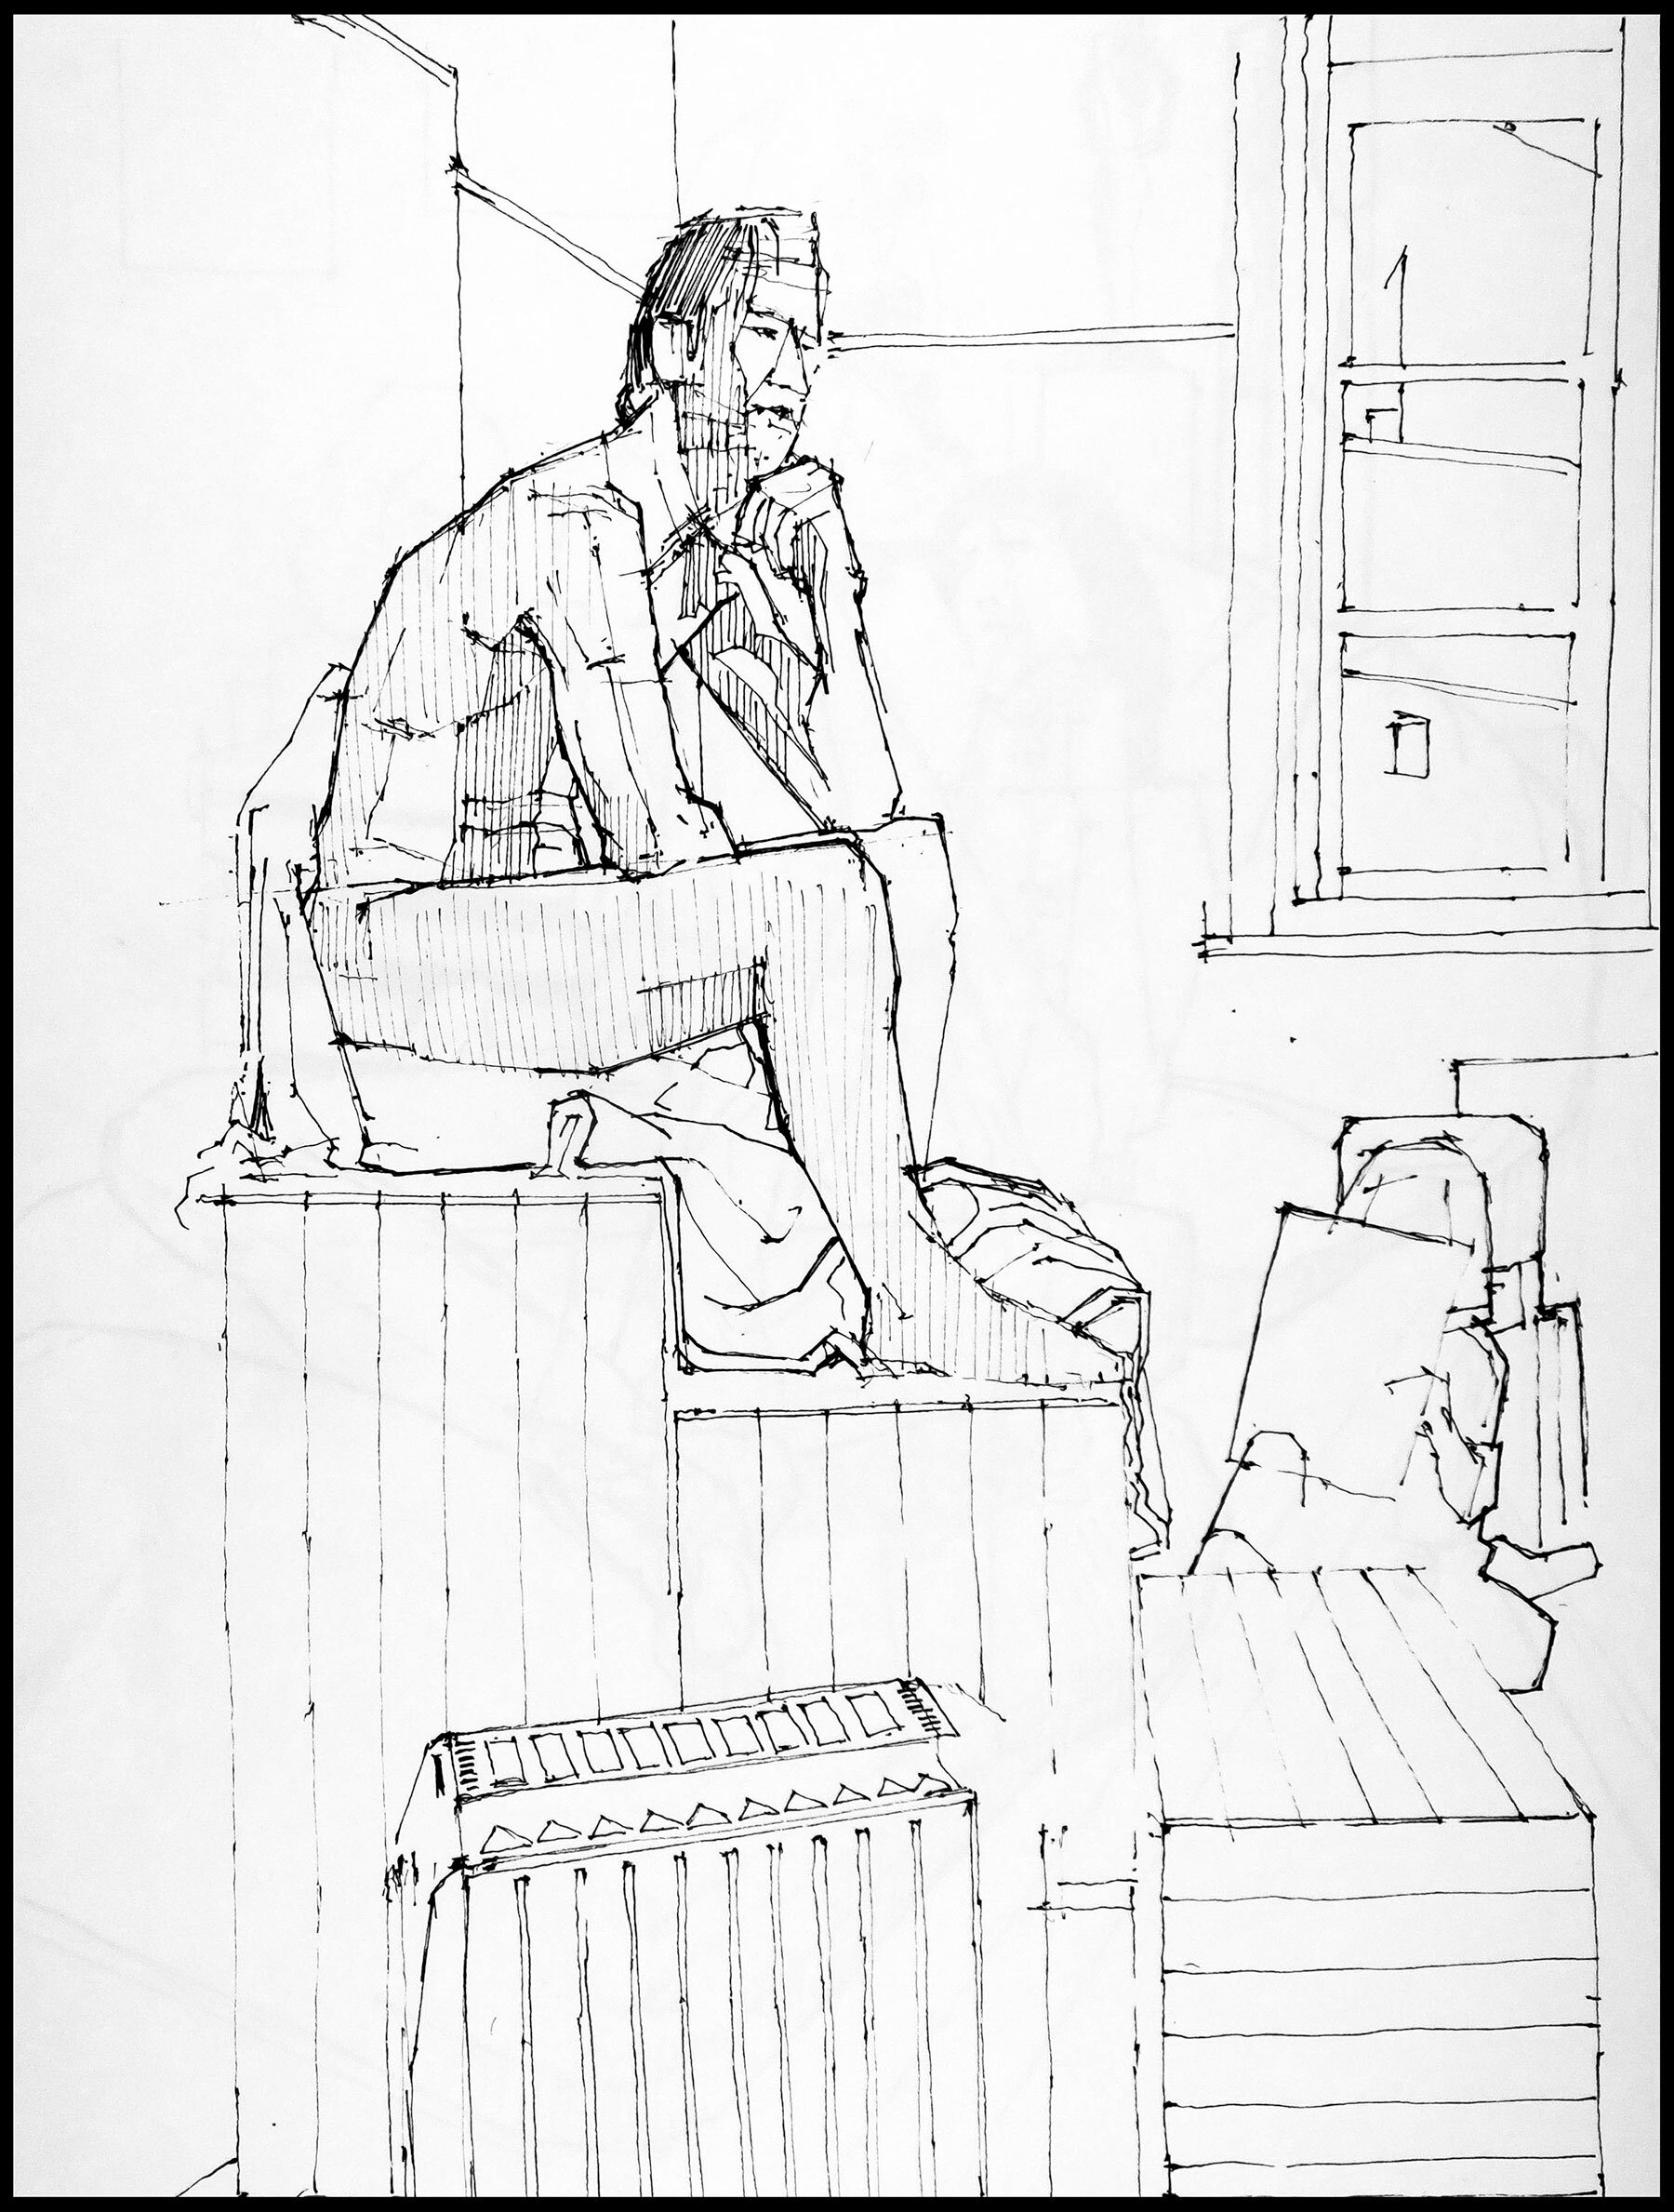 Andy seated (Copy)